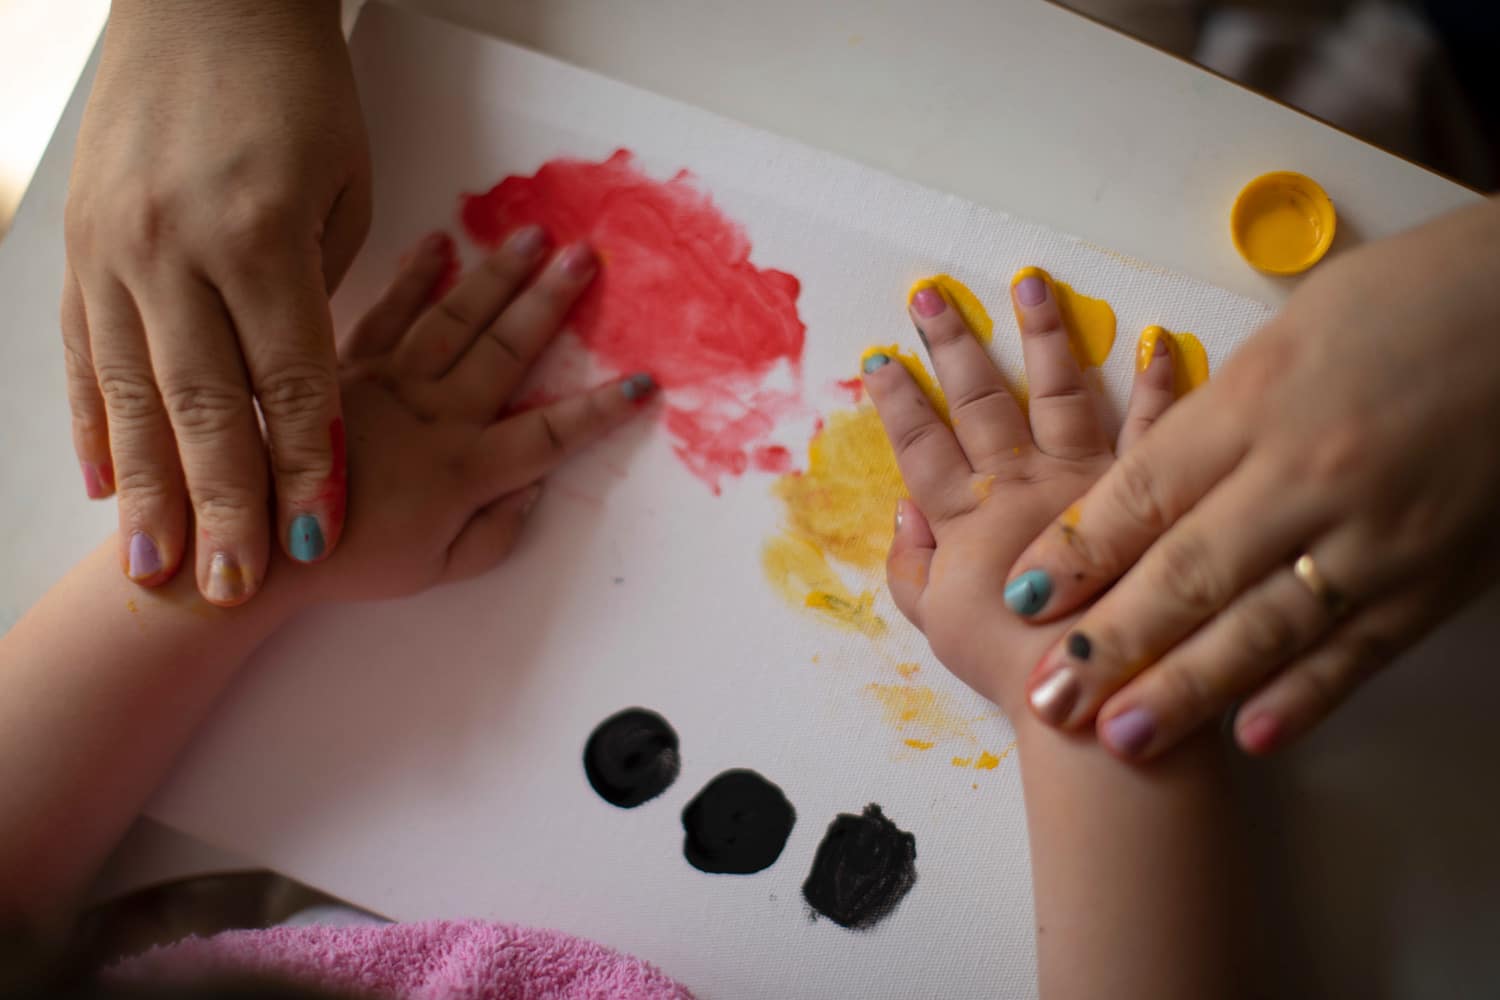 Baby with Zika congenital disease finger painting with mother